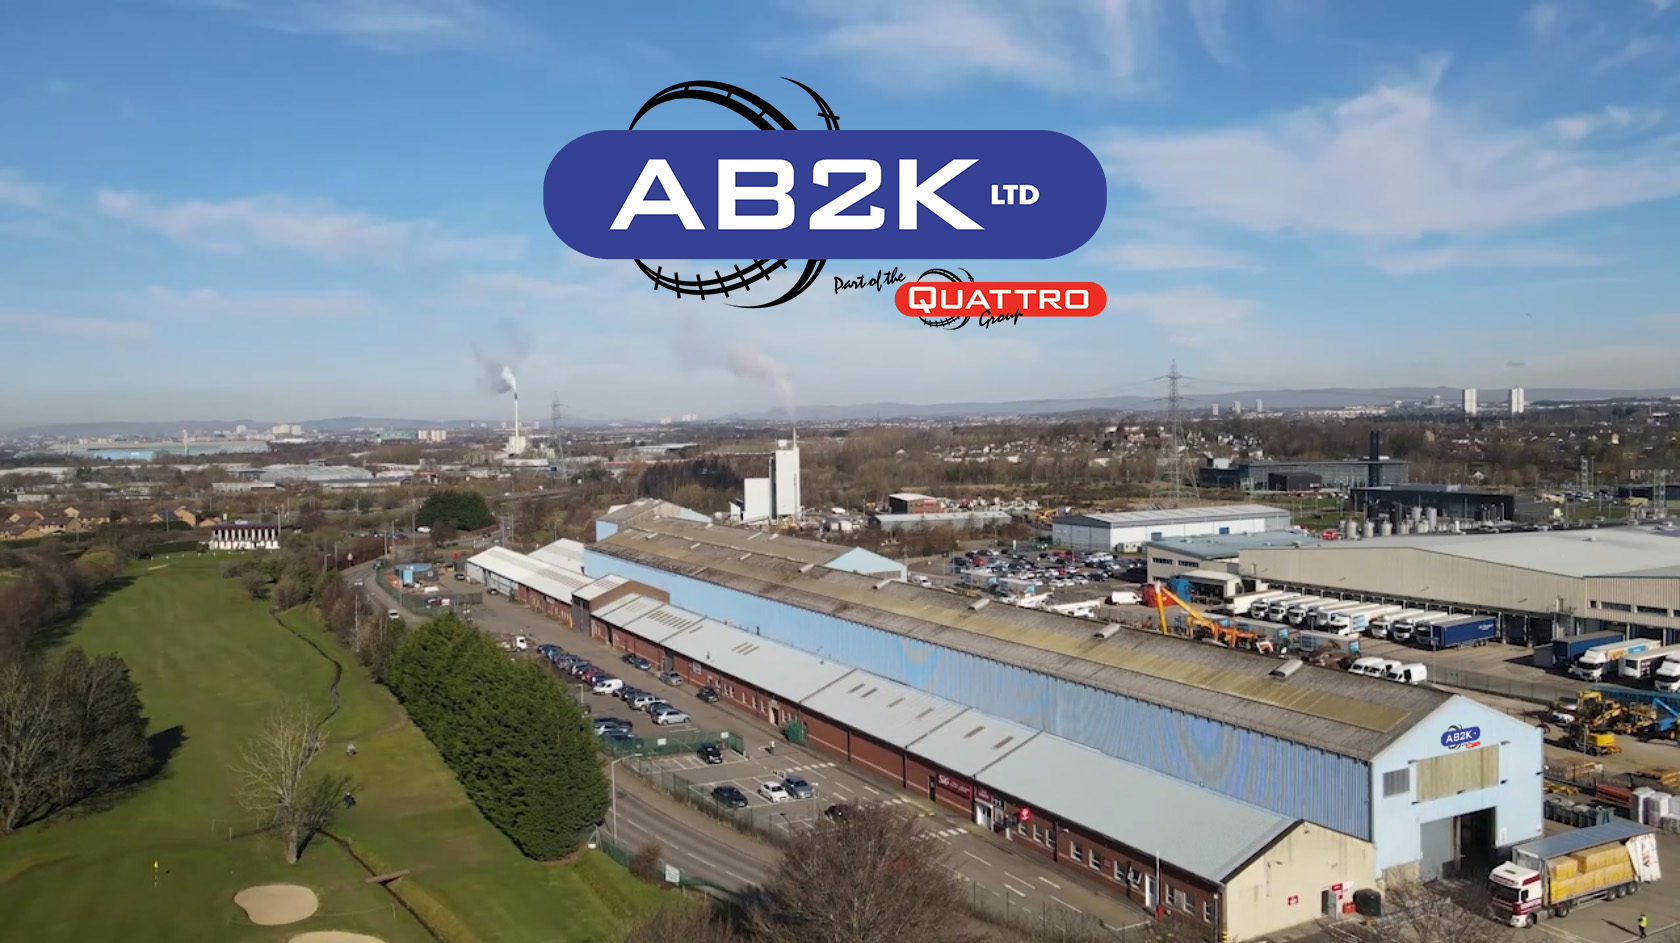  FIVE YEARS OF AB2K AS PART OF QUATTRO GROUP